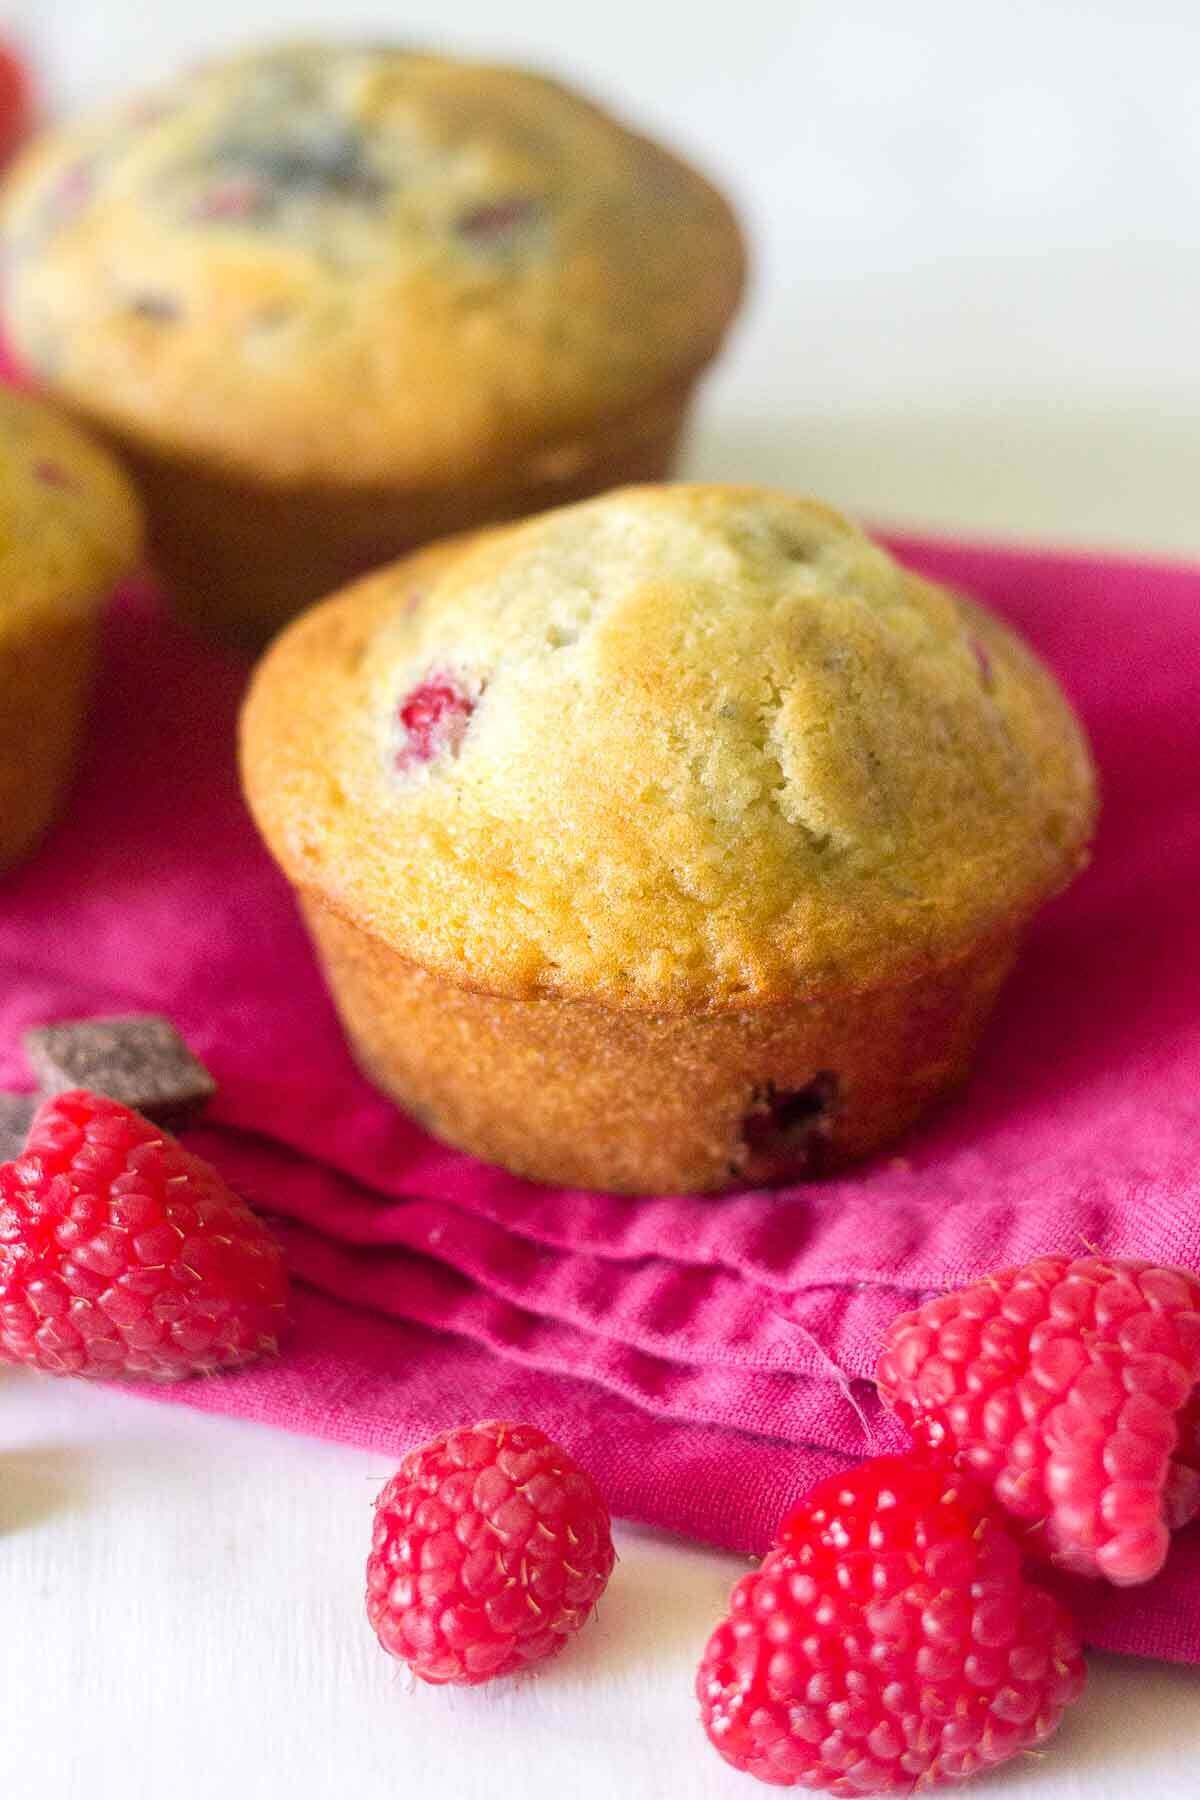 Soft and buttery muffins packed full of yummy ingredients! These Raspberry Chocolate Chunk Muffins will make your next Monday mornings the best yet. The melty chocolate oozes with each bite and the raspberries burst with flavor.